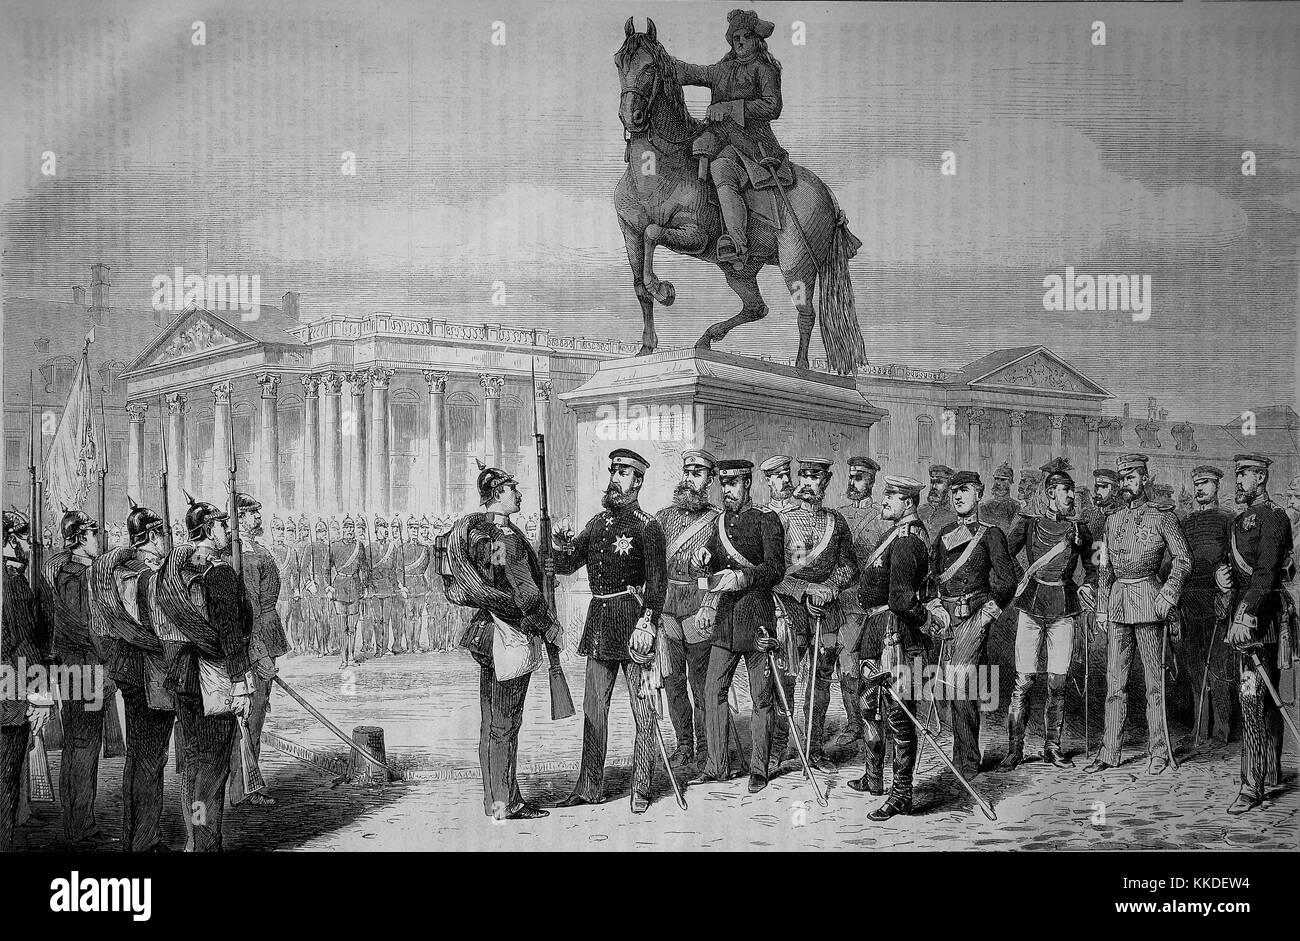 Order ceremony on the Palace Square in Versailles by the Crown Prince of Prussia on 27th of September, France, Franco-German War 1870/71, Franco-Prussian War or Franco-German War, War of 1870, a conflict between the Second French Empire of Napoleon III and the German states of the North German Confederation led by the Kingdom of Prussia, Digital improved reproduction of an original woodcut Stock Photo